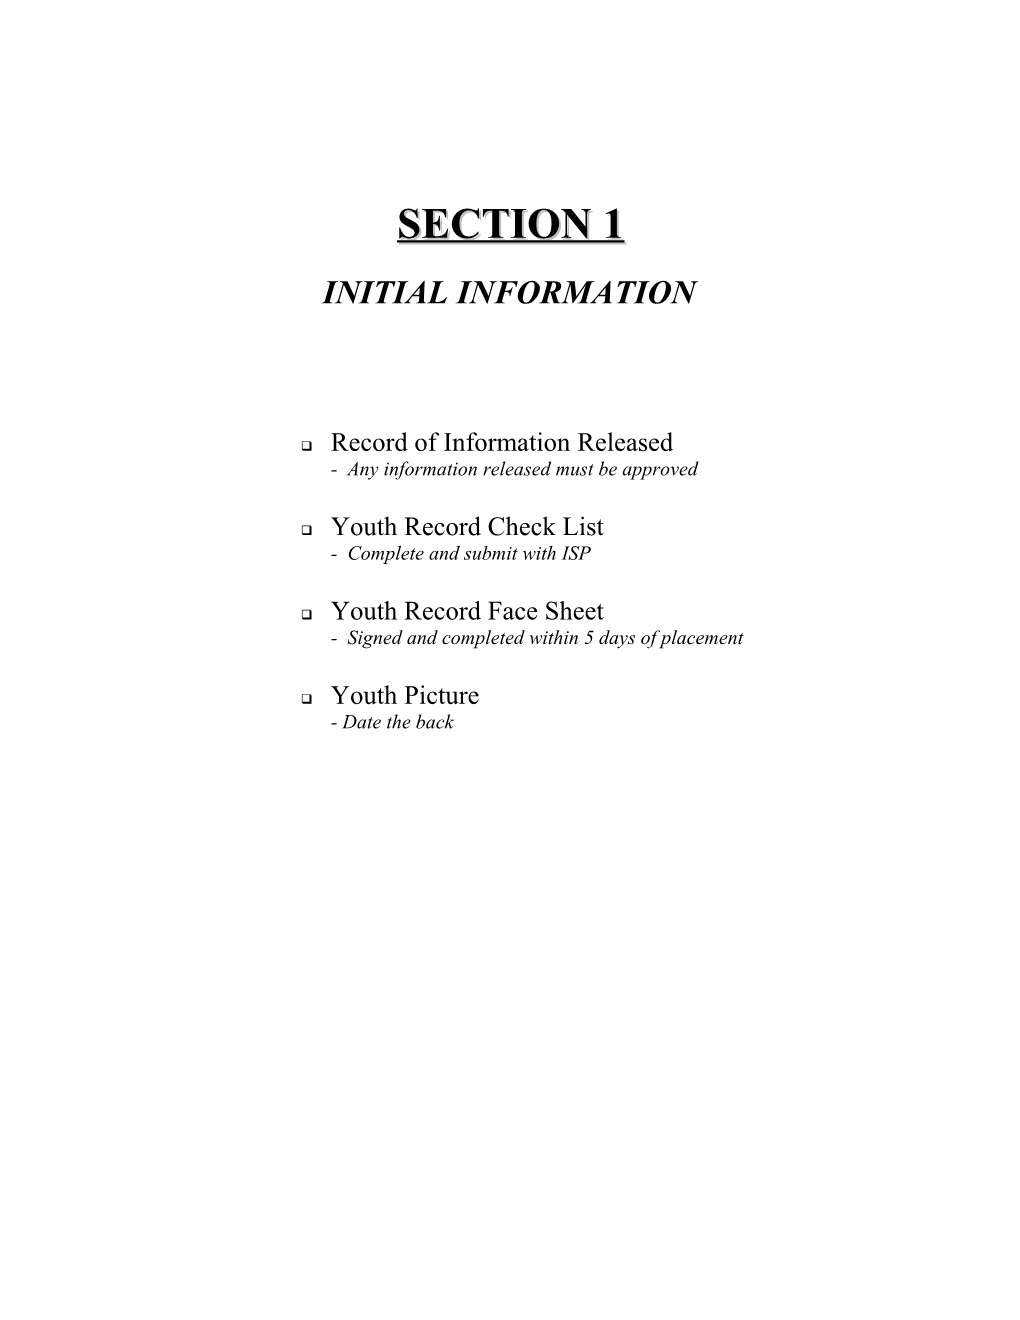 Section 1: Initial Information